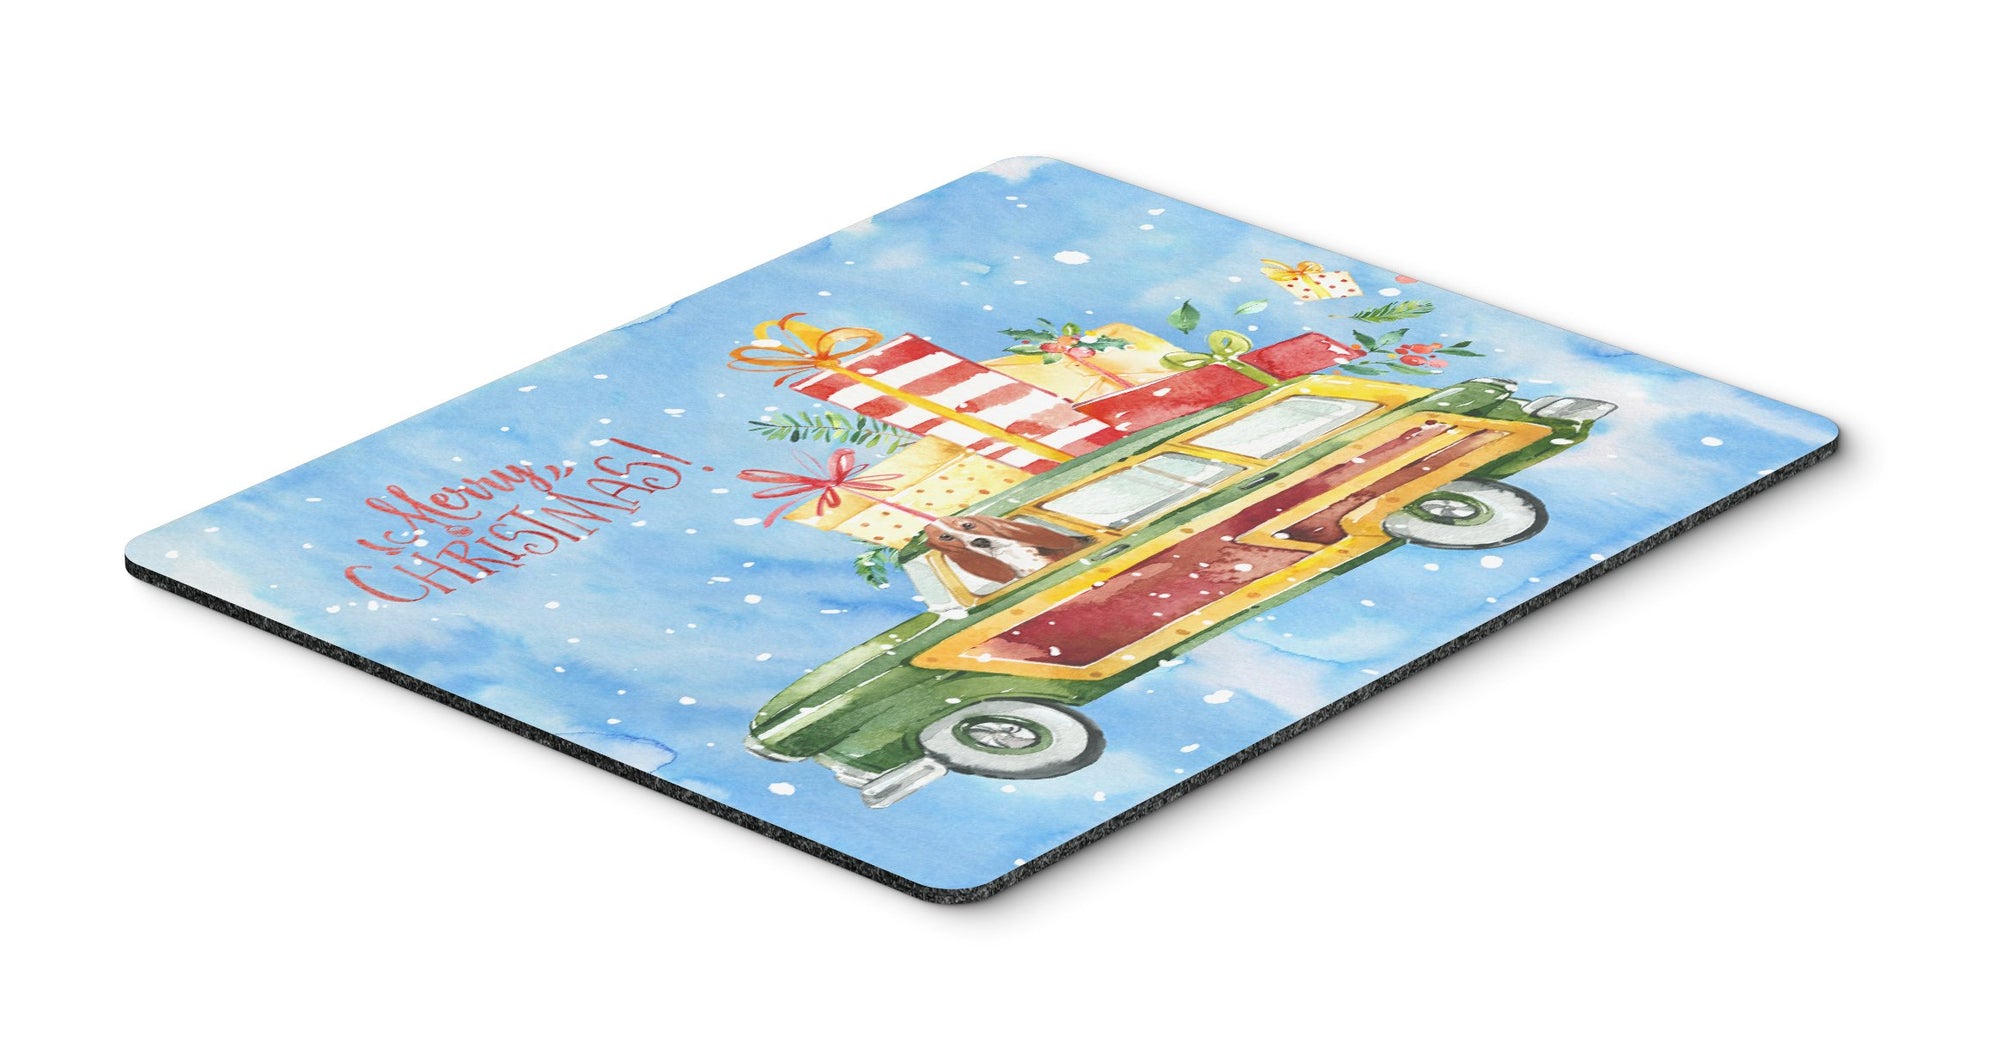 Merry Christmas Basset Hound Mouse Pad, Hot Pad or Trivet CK2393MP by Caroline's Treasures